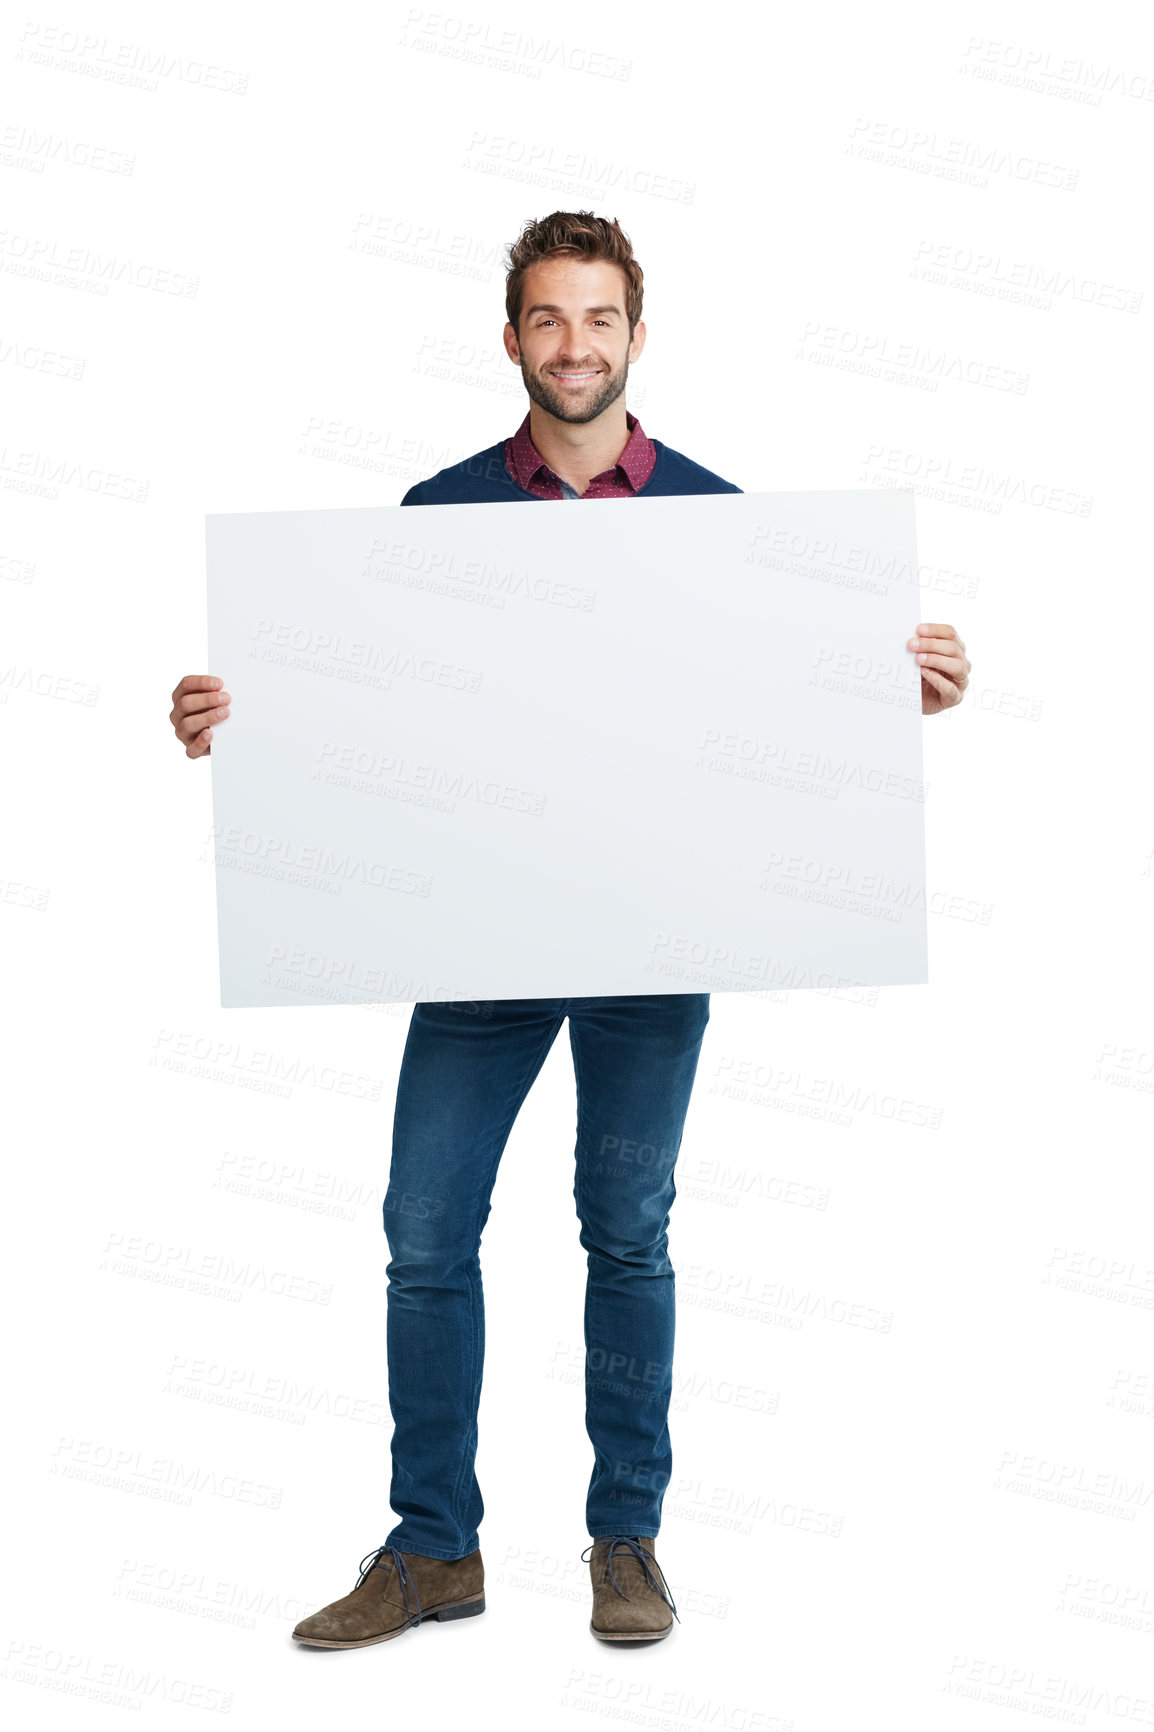 Buy stock photo Portrait, poster or business man with blank mock up marketing space for advertising or branding poster in studio. Happy, smile or model with banner, billboard news or logo flyer in white background